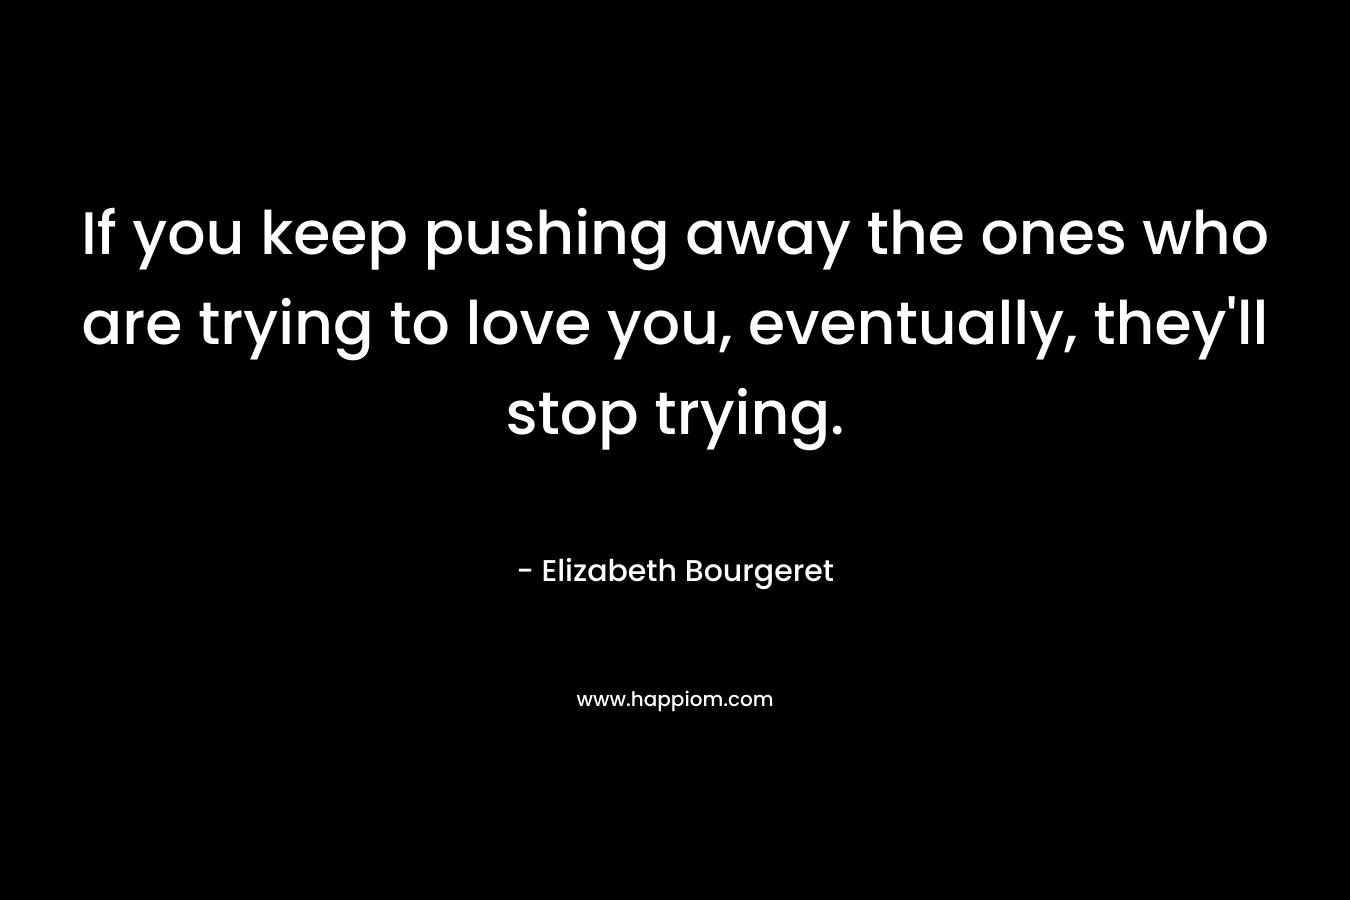 If you keep pushing away the ones who are trying to love you, eventually, they’ll stop trying. – Elizabeth Bourgeret